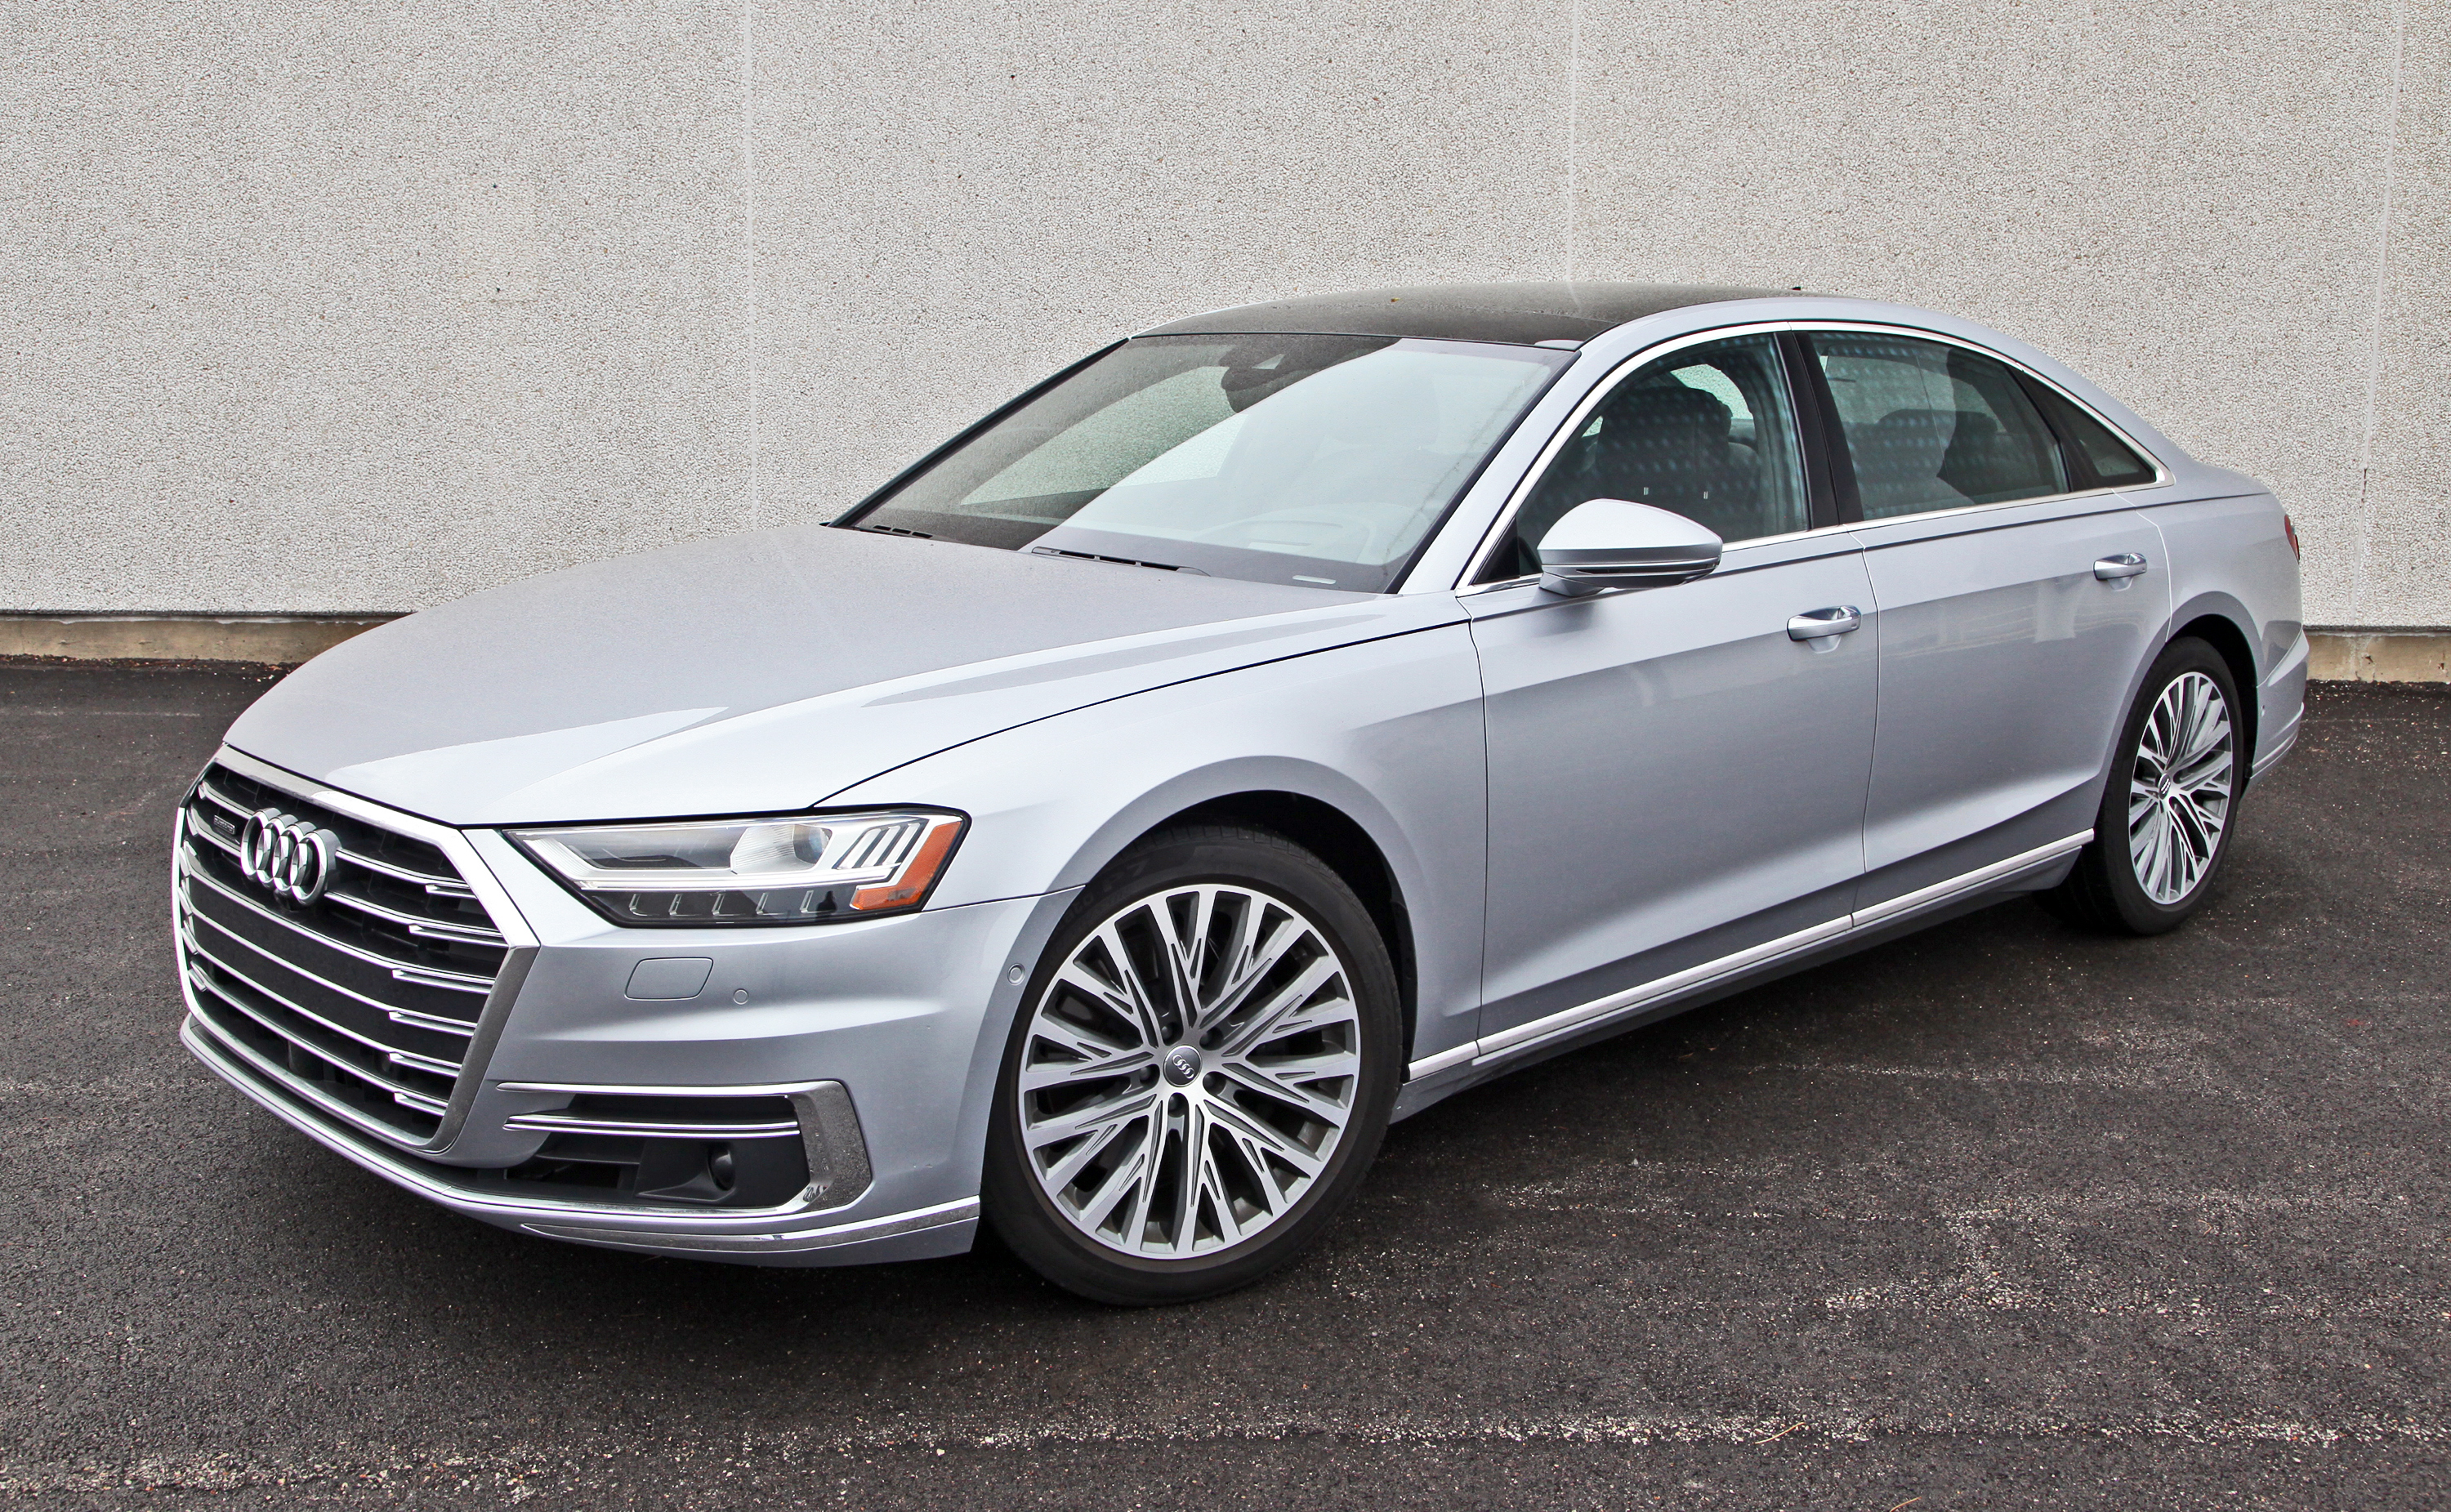 Test Drive: 2019 Audi A8L | The Daily Drive | Consumer Guide® The Daily  Drive | Consumer Guide®